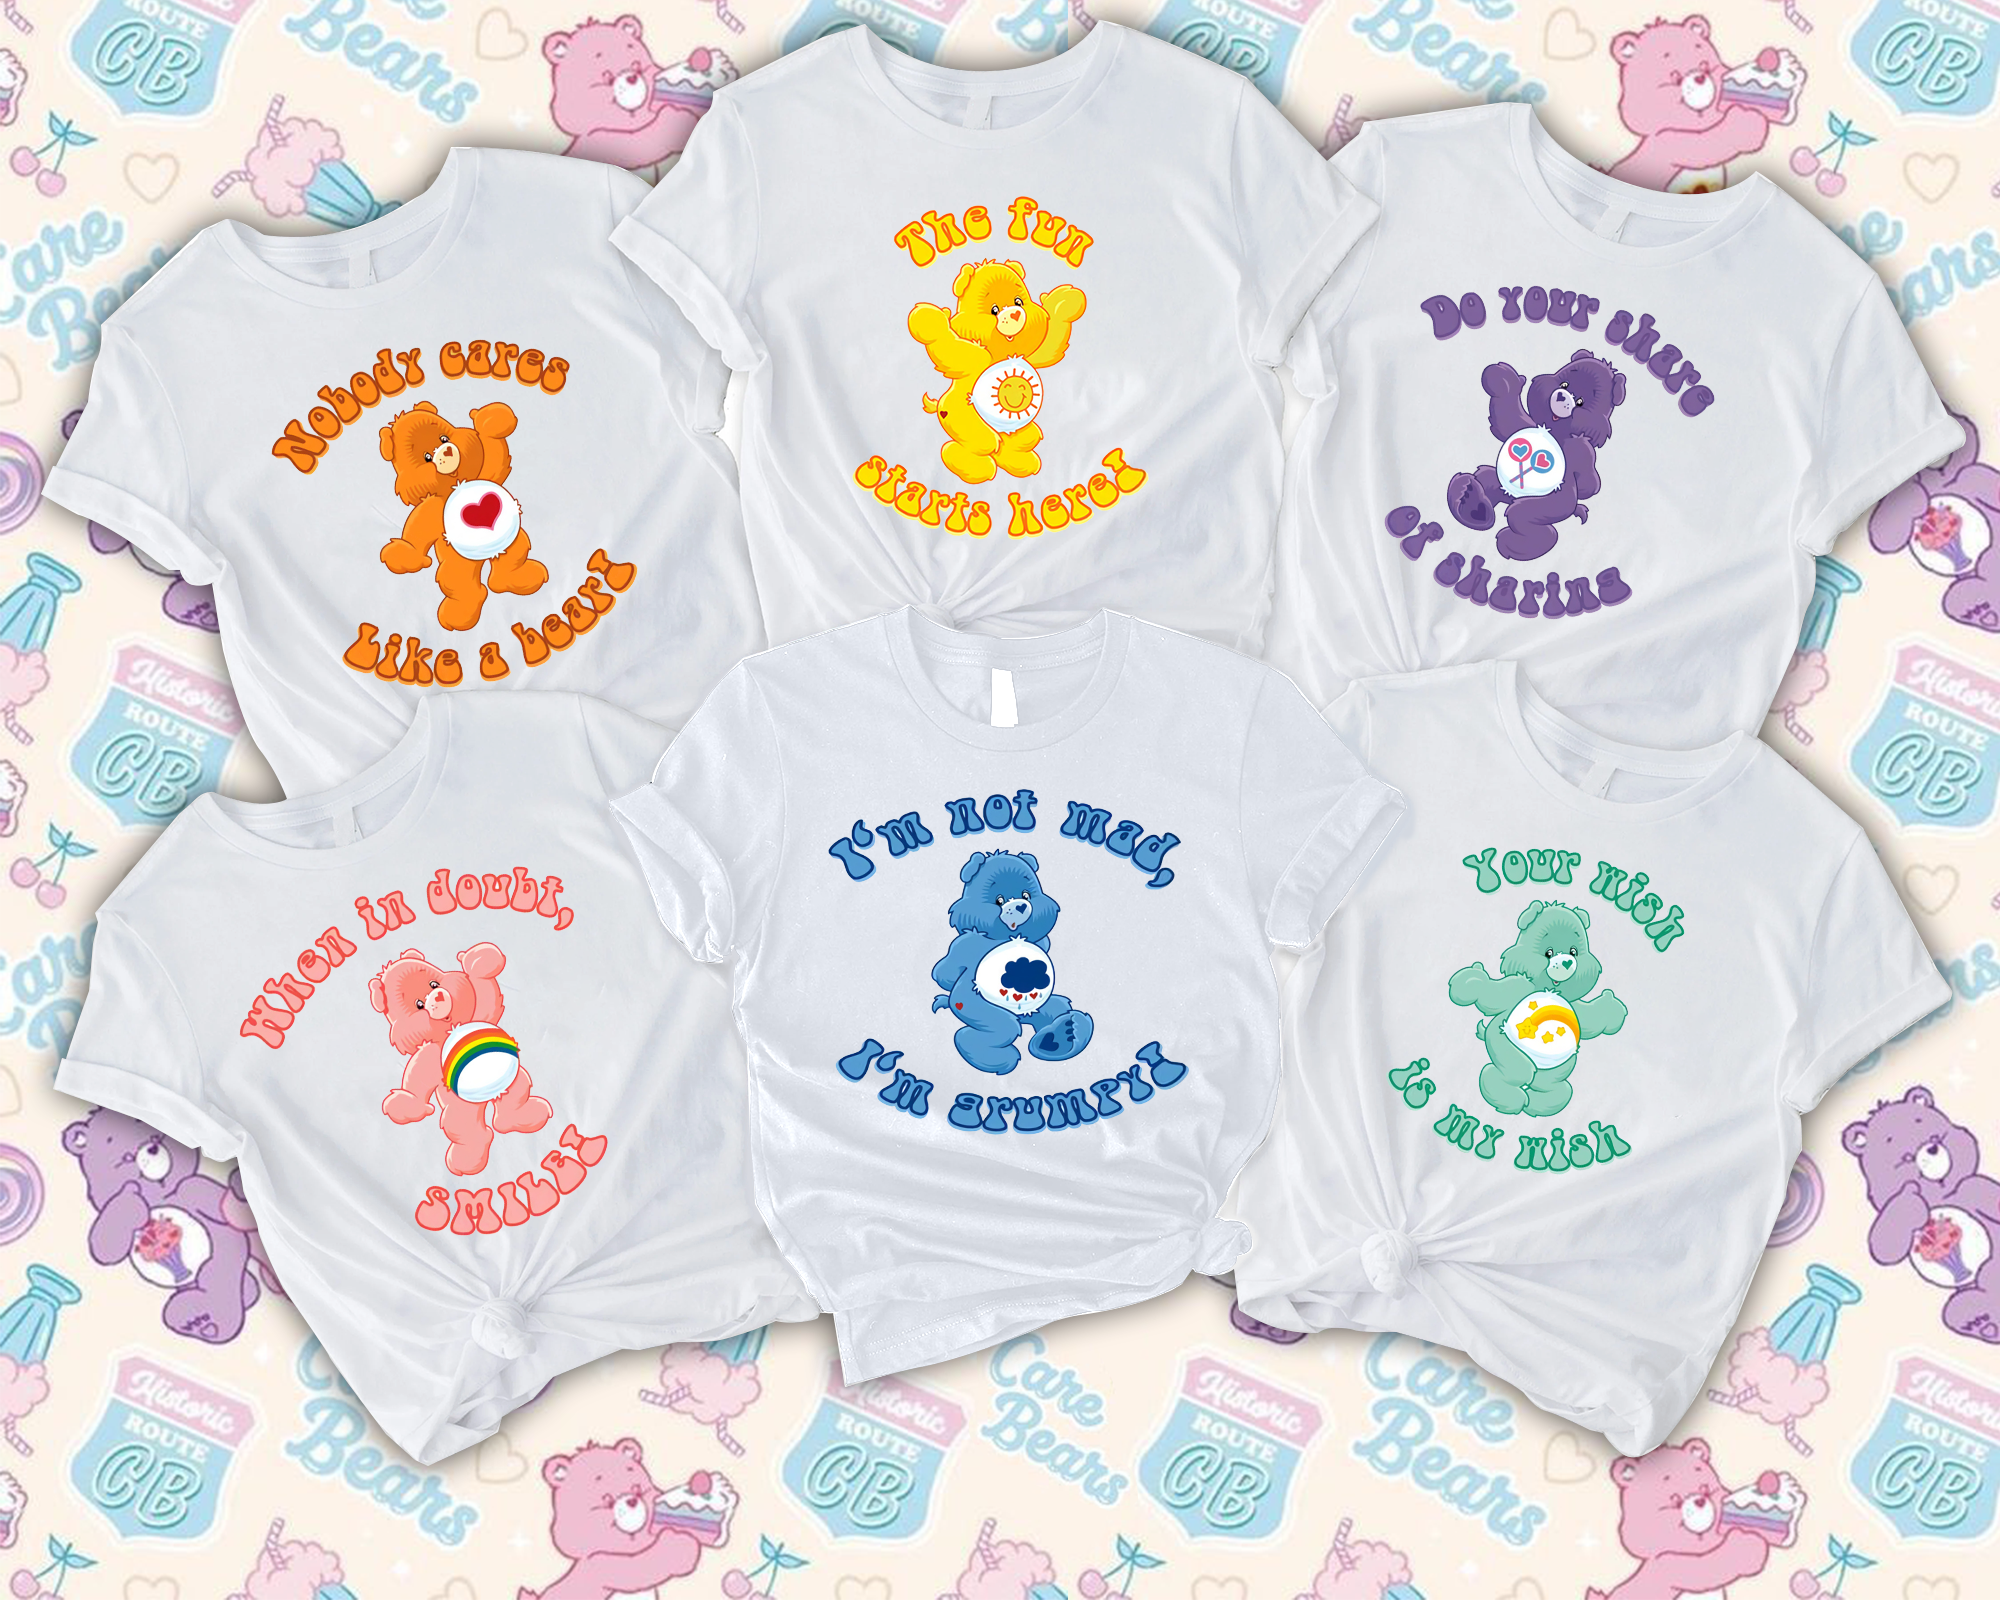 Care Bears Adult Unisex Group Costume Shirts, Halloween, Bedtime, Grumpy, Funshine, Good Luck , Love A Lot, Couples Costumes